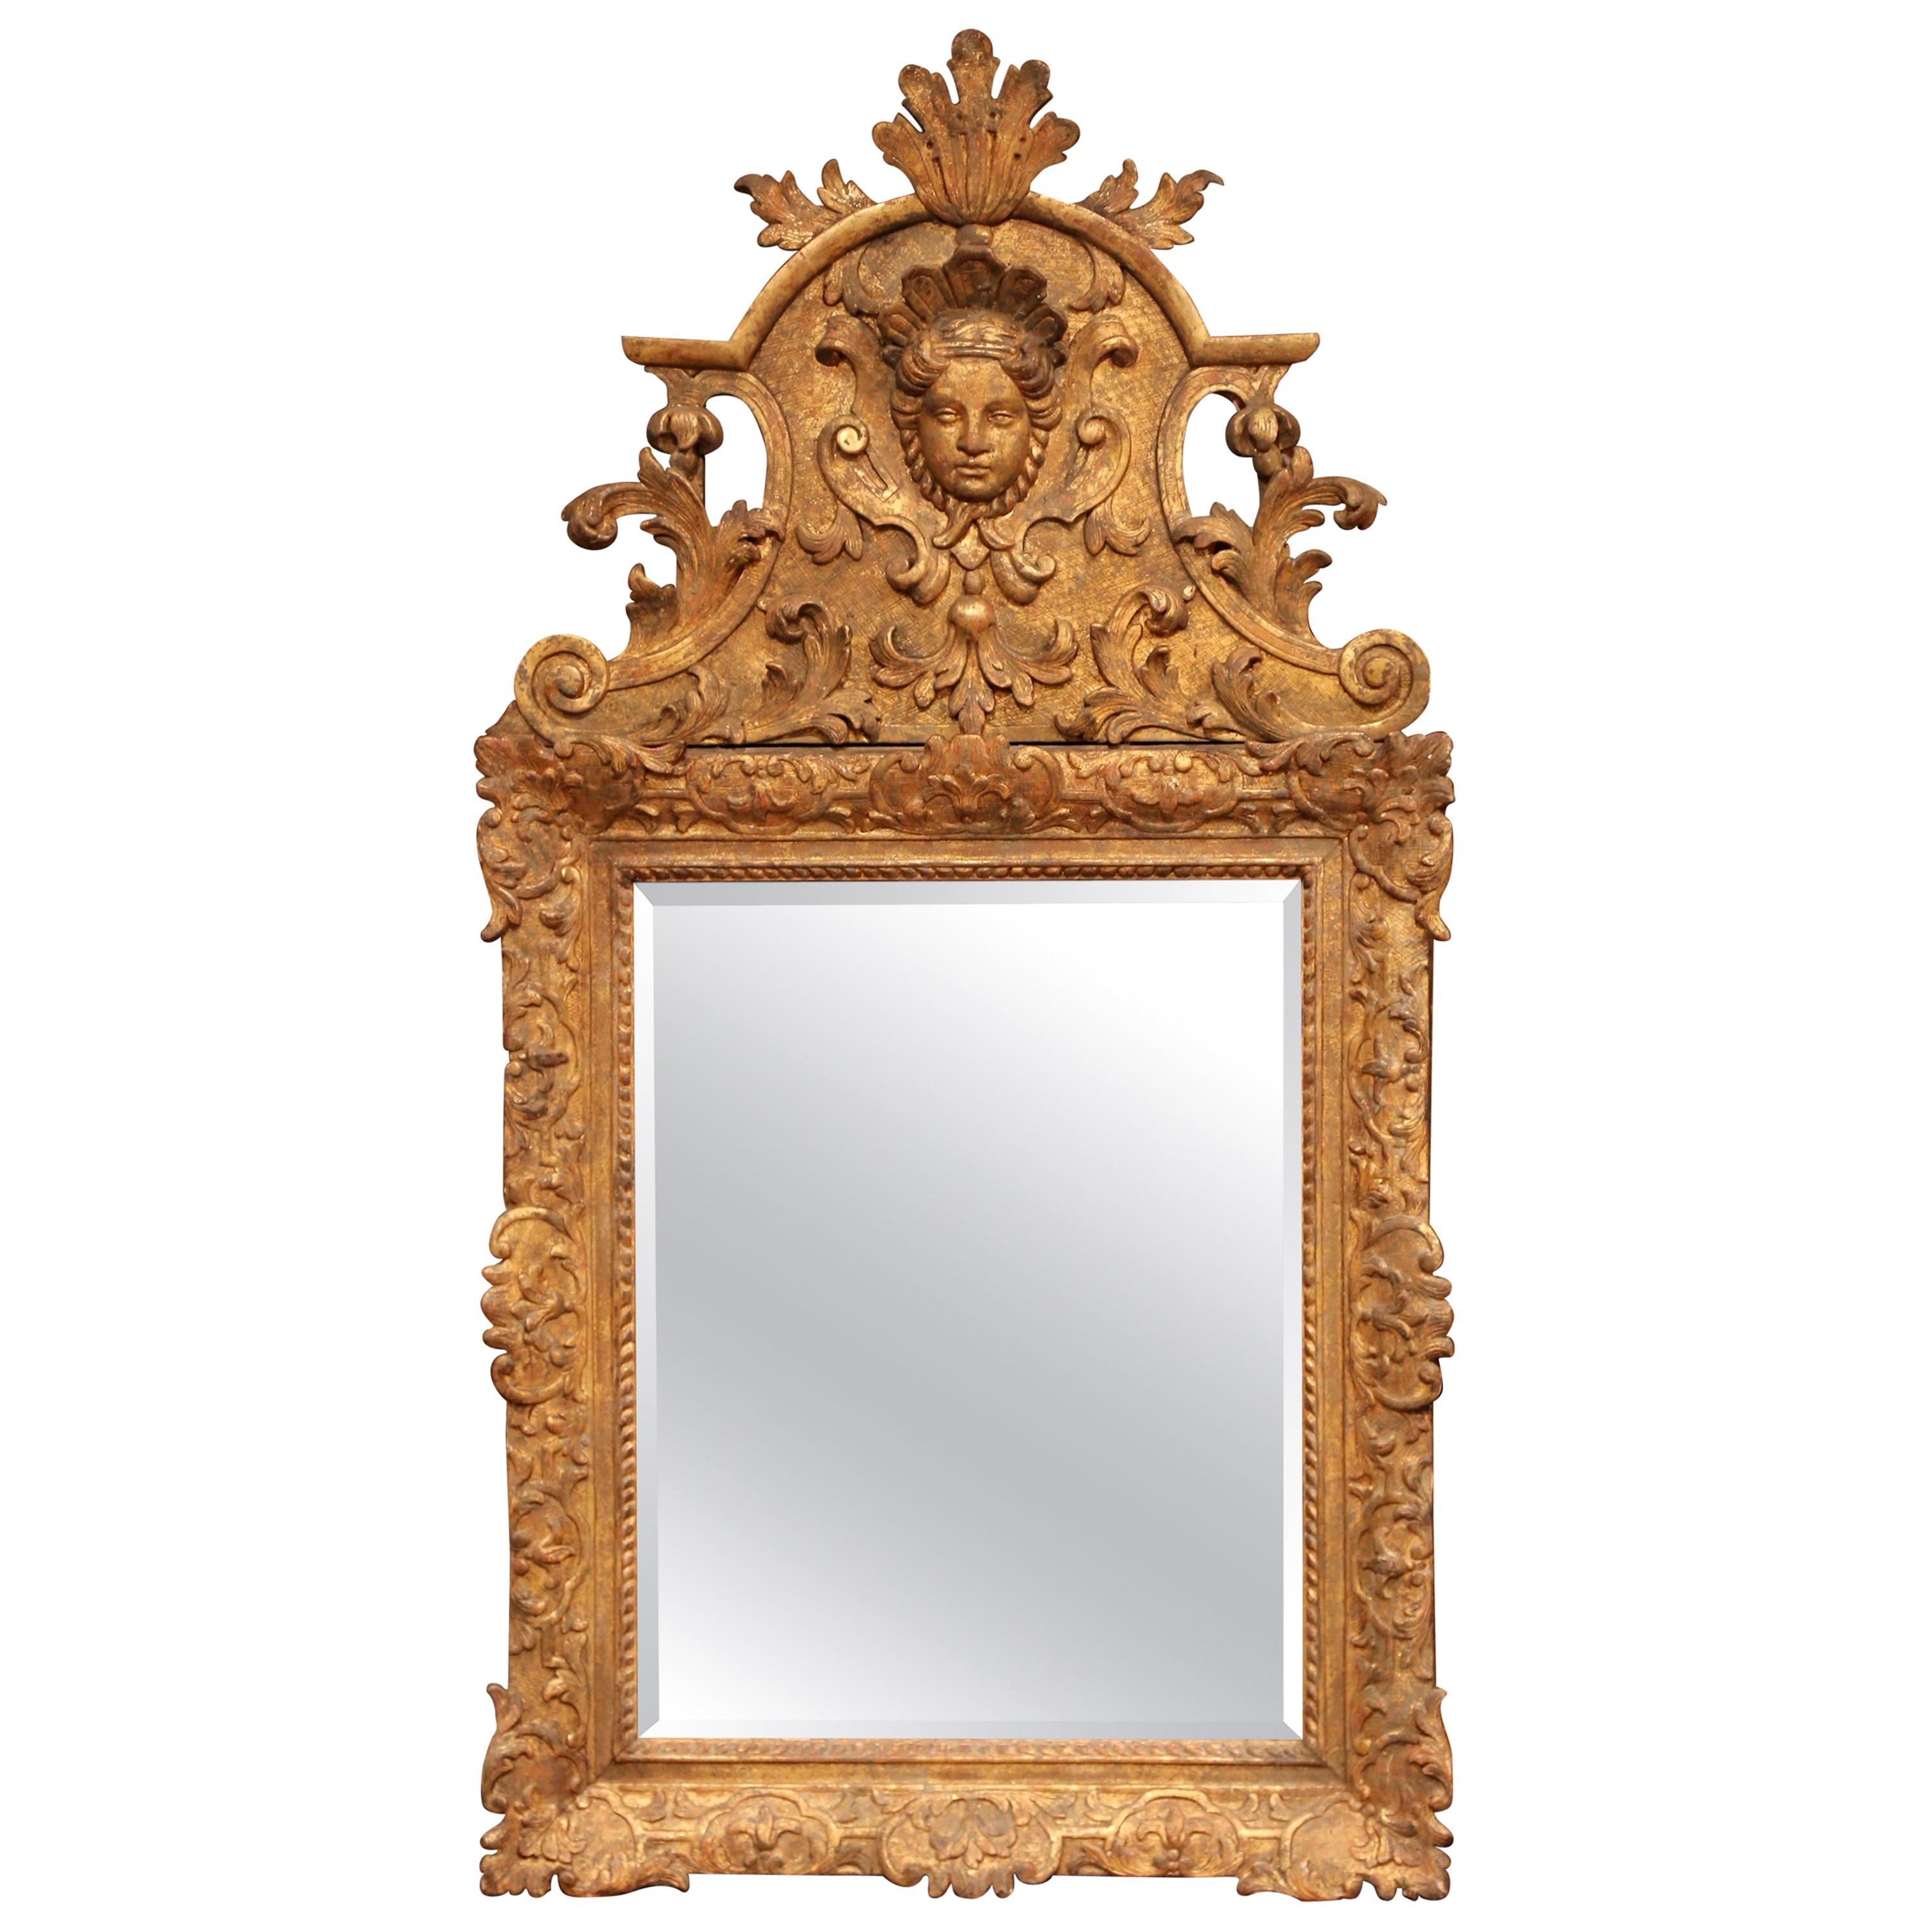 18th Century French Regence Carved Giltwood Wall Mirror with Ornate Pediment